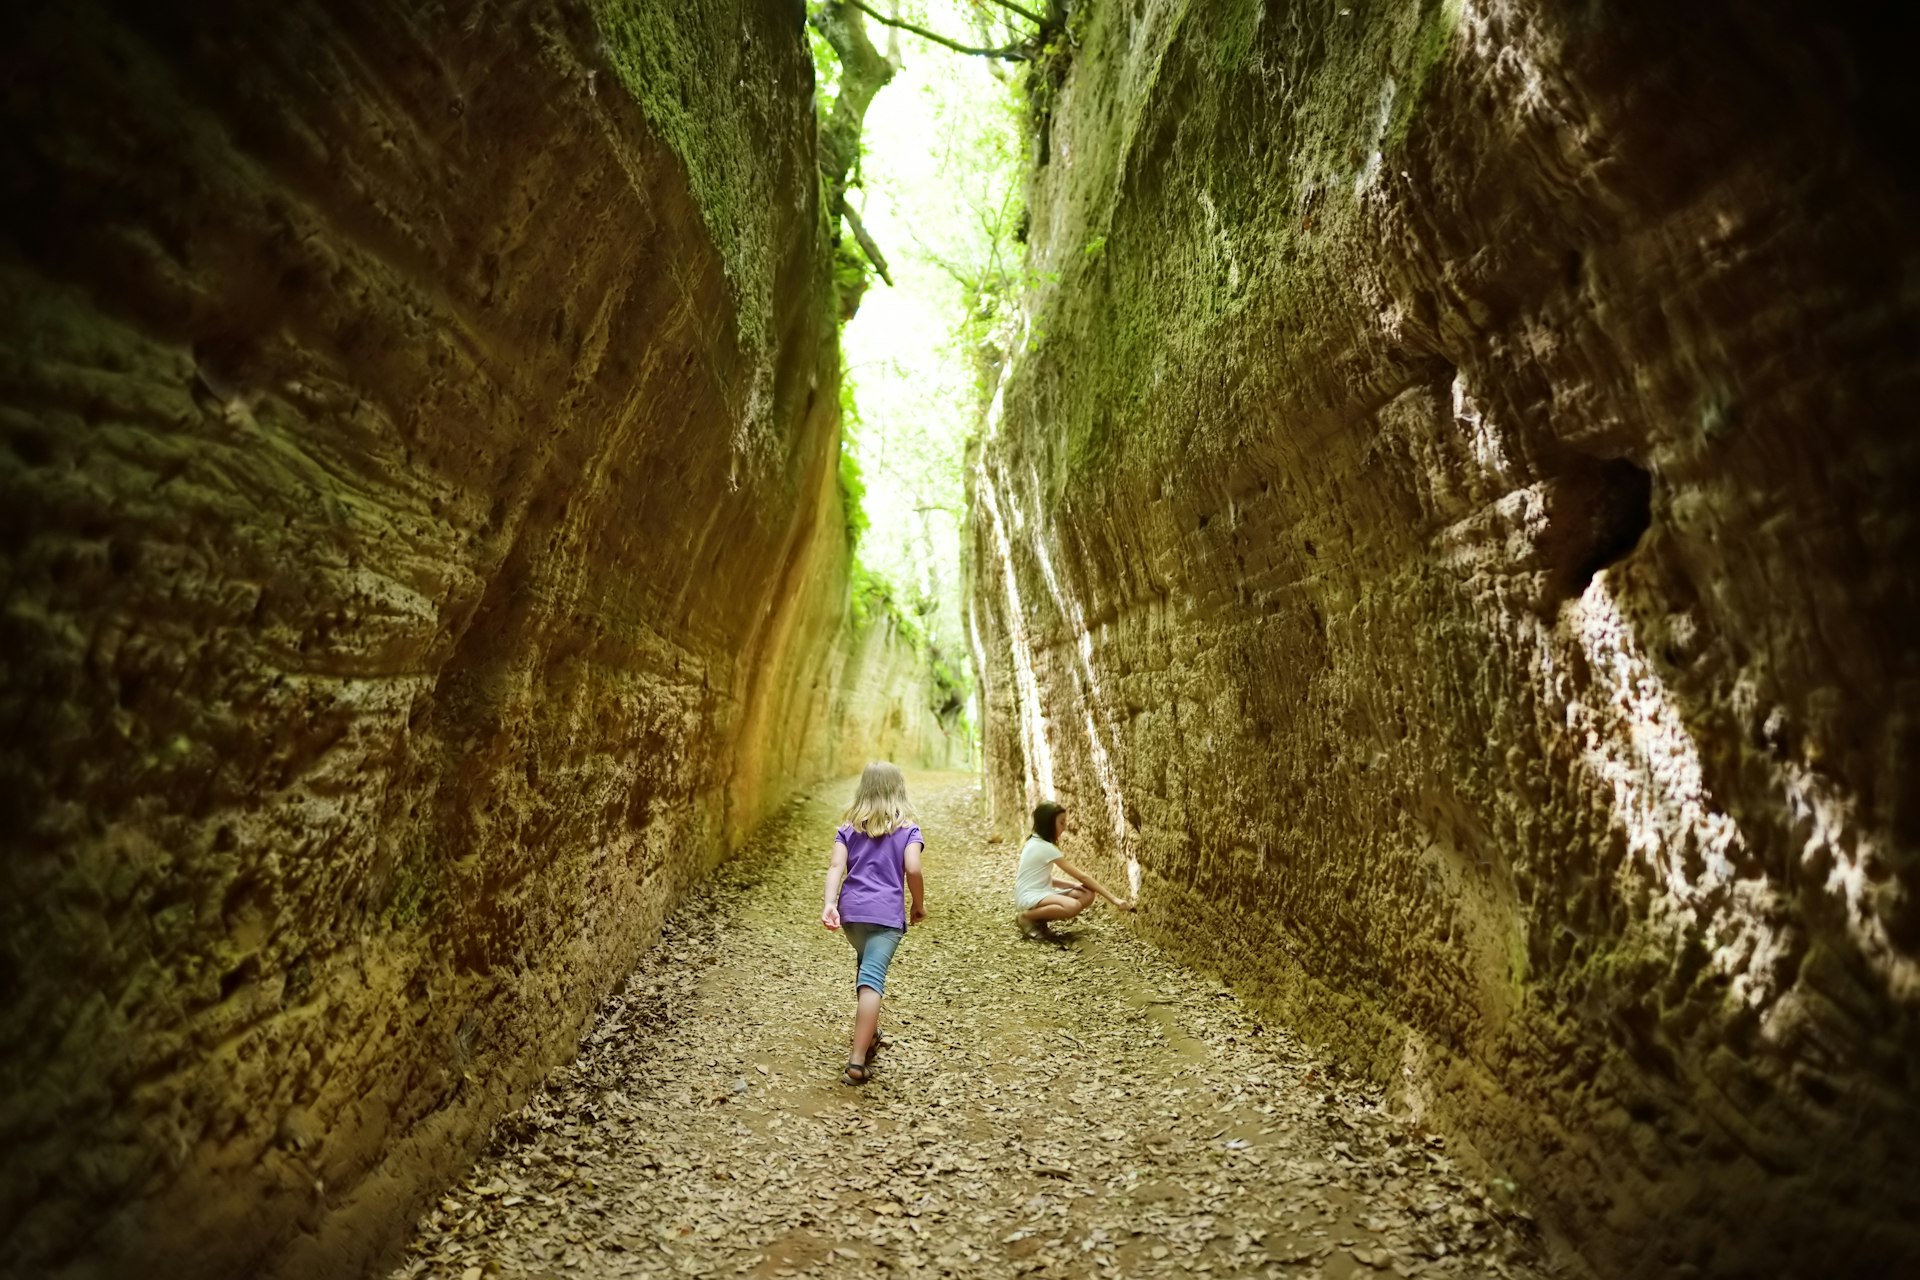 Children wander down the vie cave, excavated ancient Etruscan roads at the Necropoli di Sovana